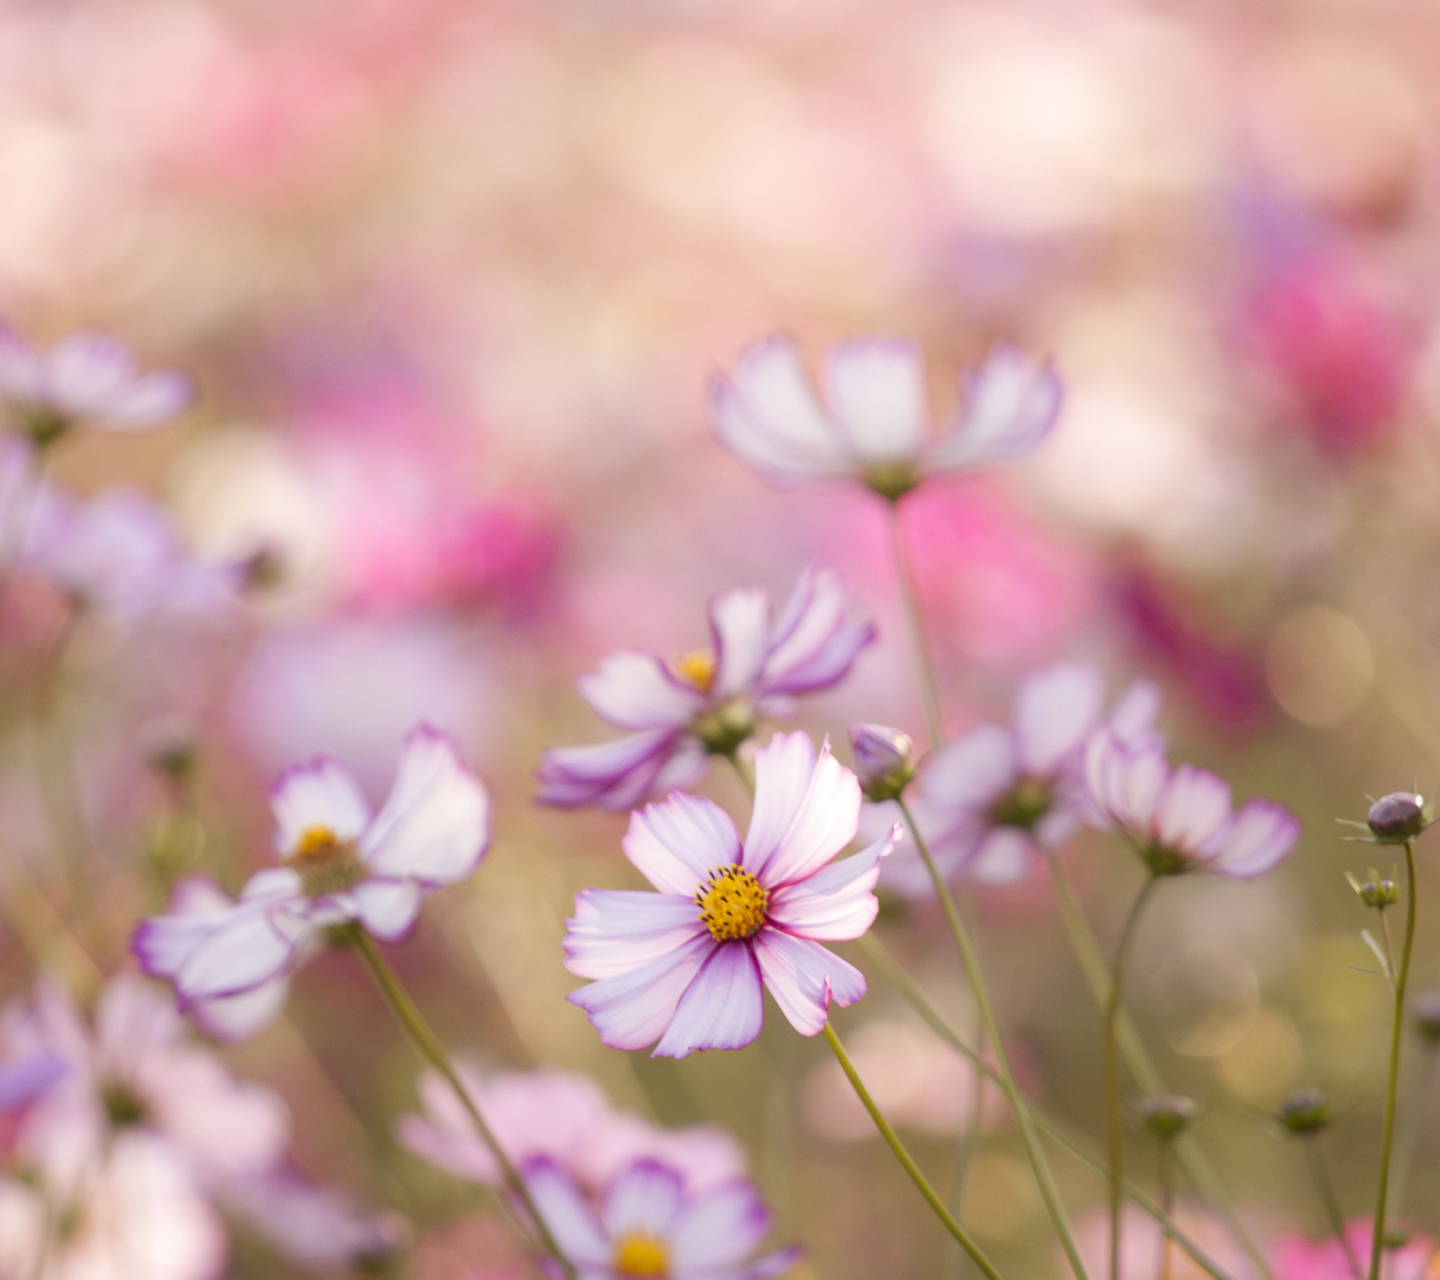 Field Of White And Pink Petals screenshot #1 1440x1280